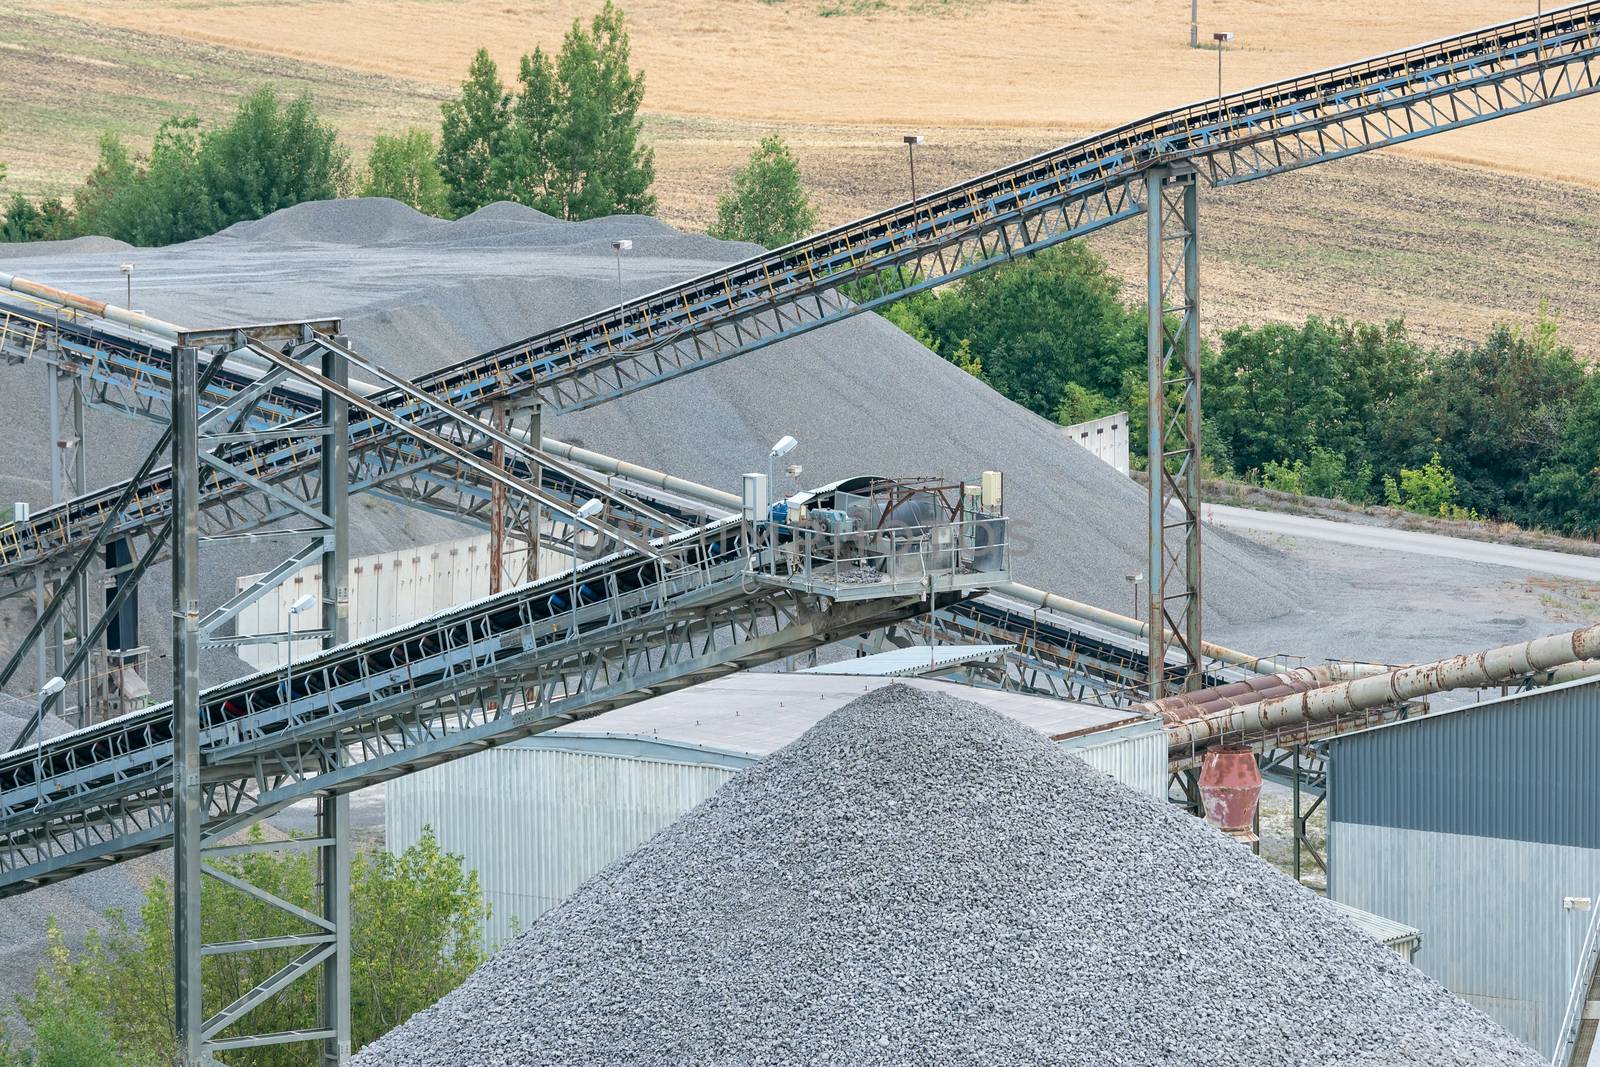 Belt conveyors and mining equipment in a quarry. Stone quarry with conveyor belts and piles of stones. Quarrying of stones for construction works.